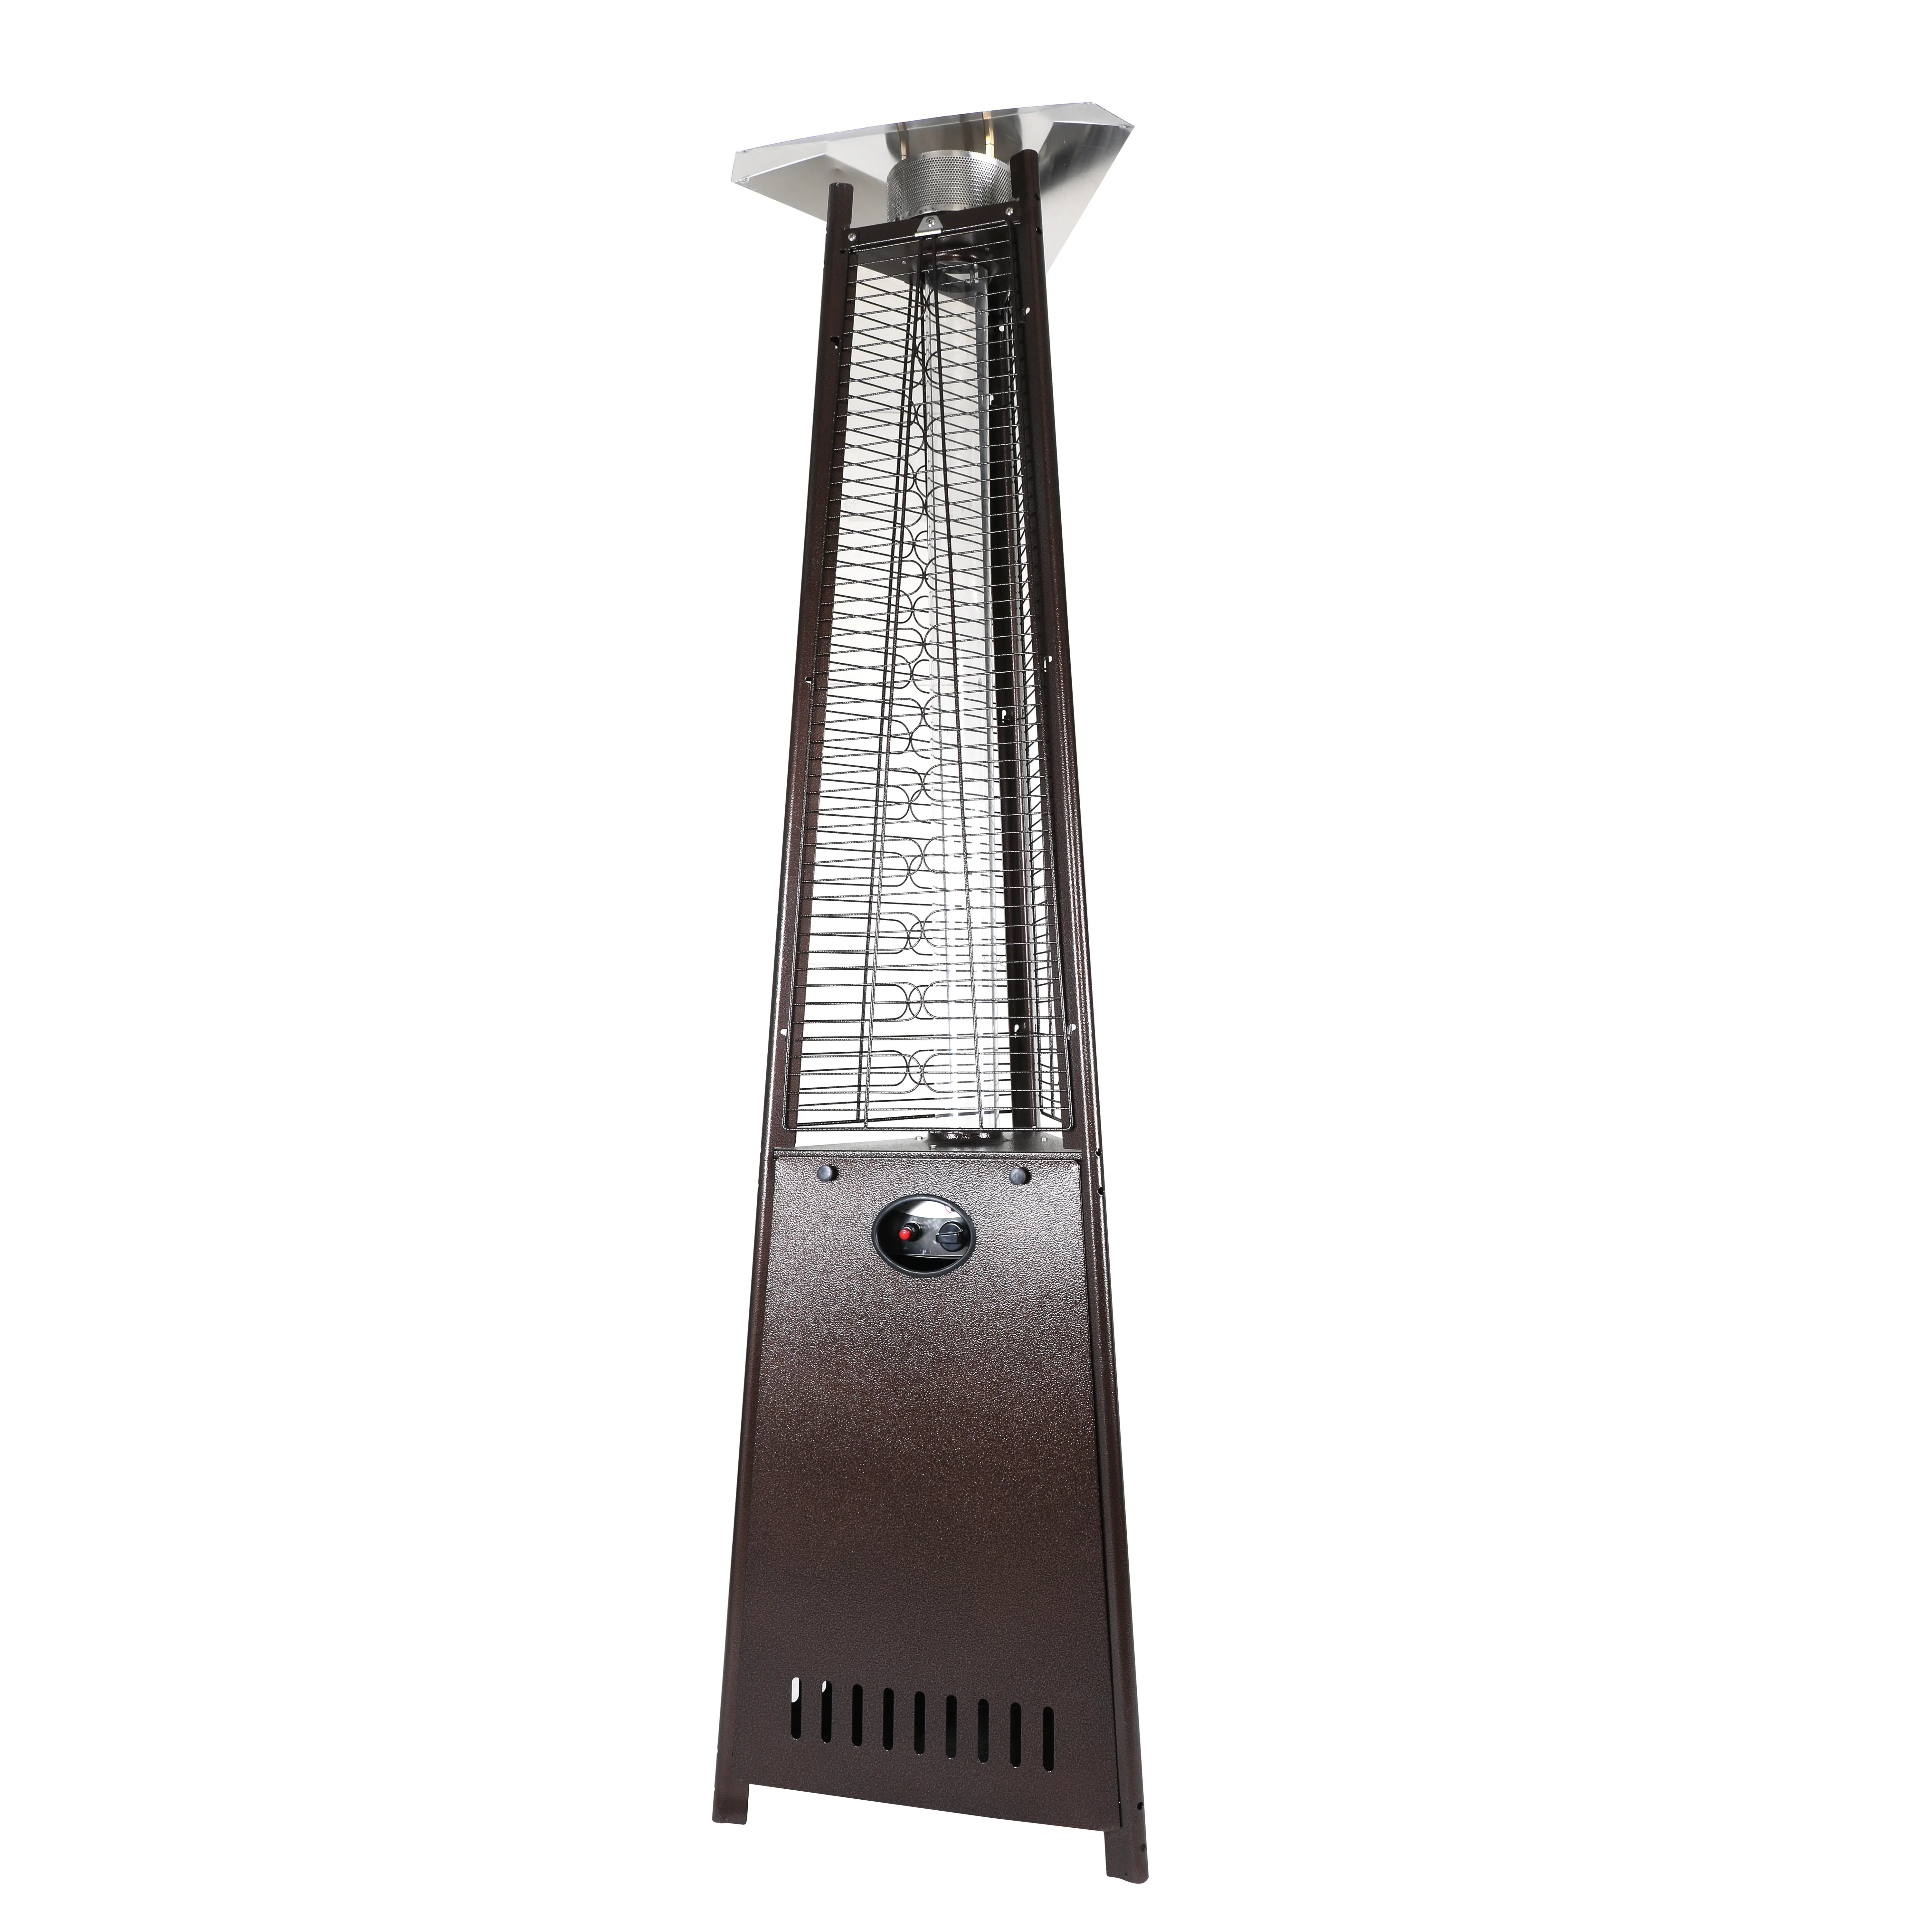 

New 2019 hot Sell 12KW Free Standing Pyramid Flame Gas Patio Heater with CE/ETL For outdoor living